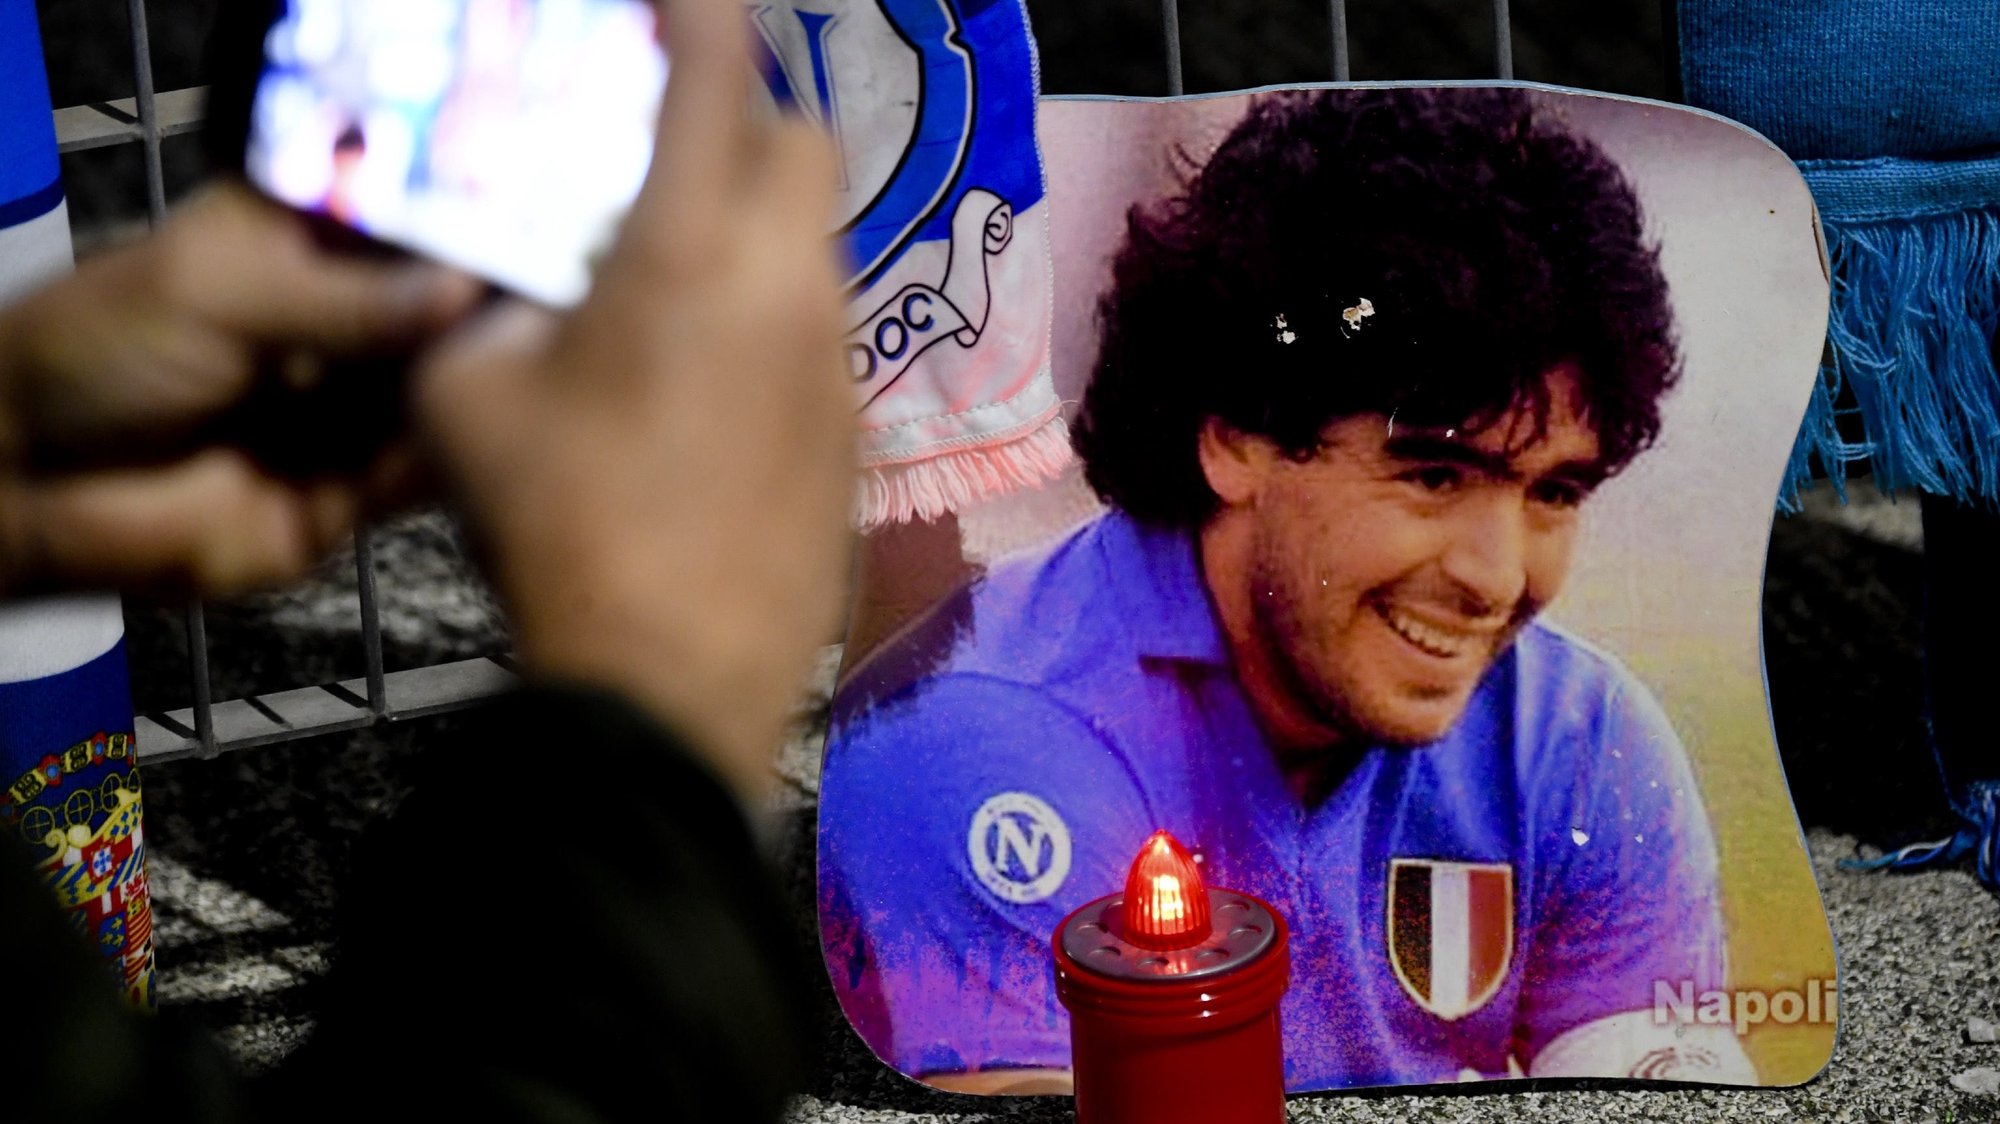 epa08842904 Napoli soccer supporters at the San Paolo stadium pay tribute to soccer legend Maradona in Naples, Italy, 25 November 2020 (issued on 26 November). Diego Maradona died on 25 November after a heart attack  EPA/CIRO FUSCO